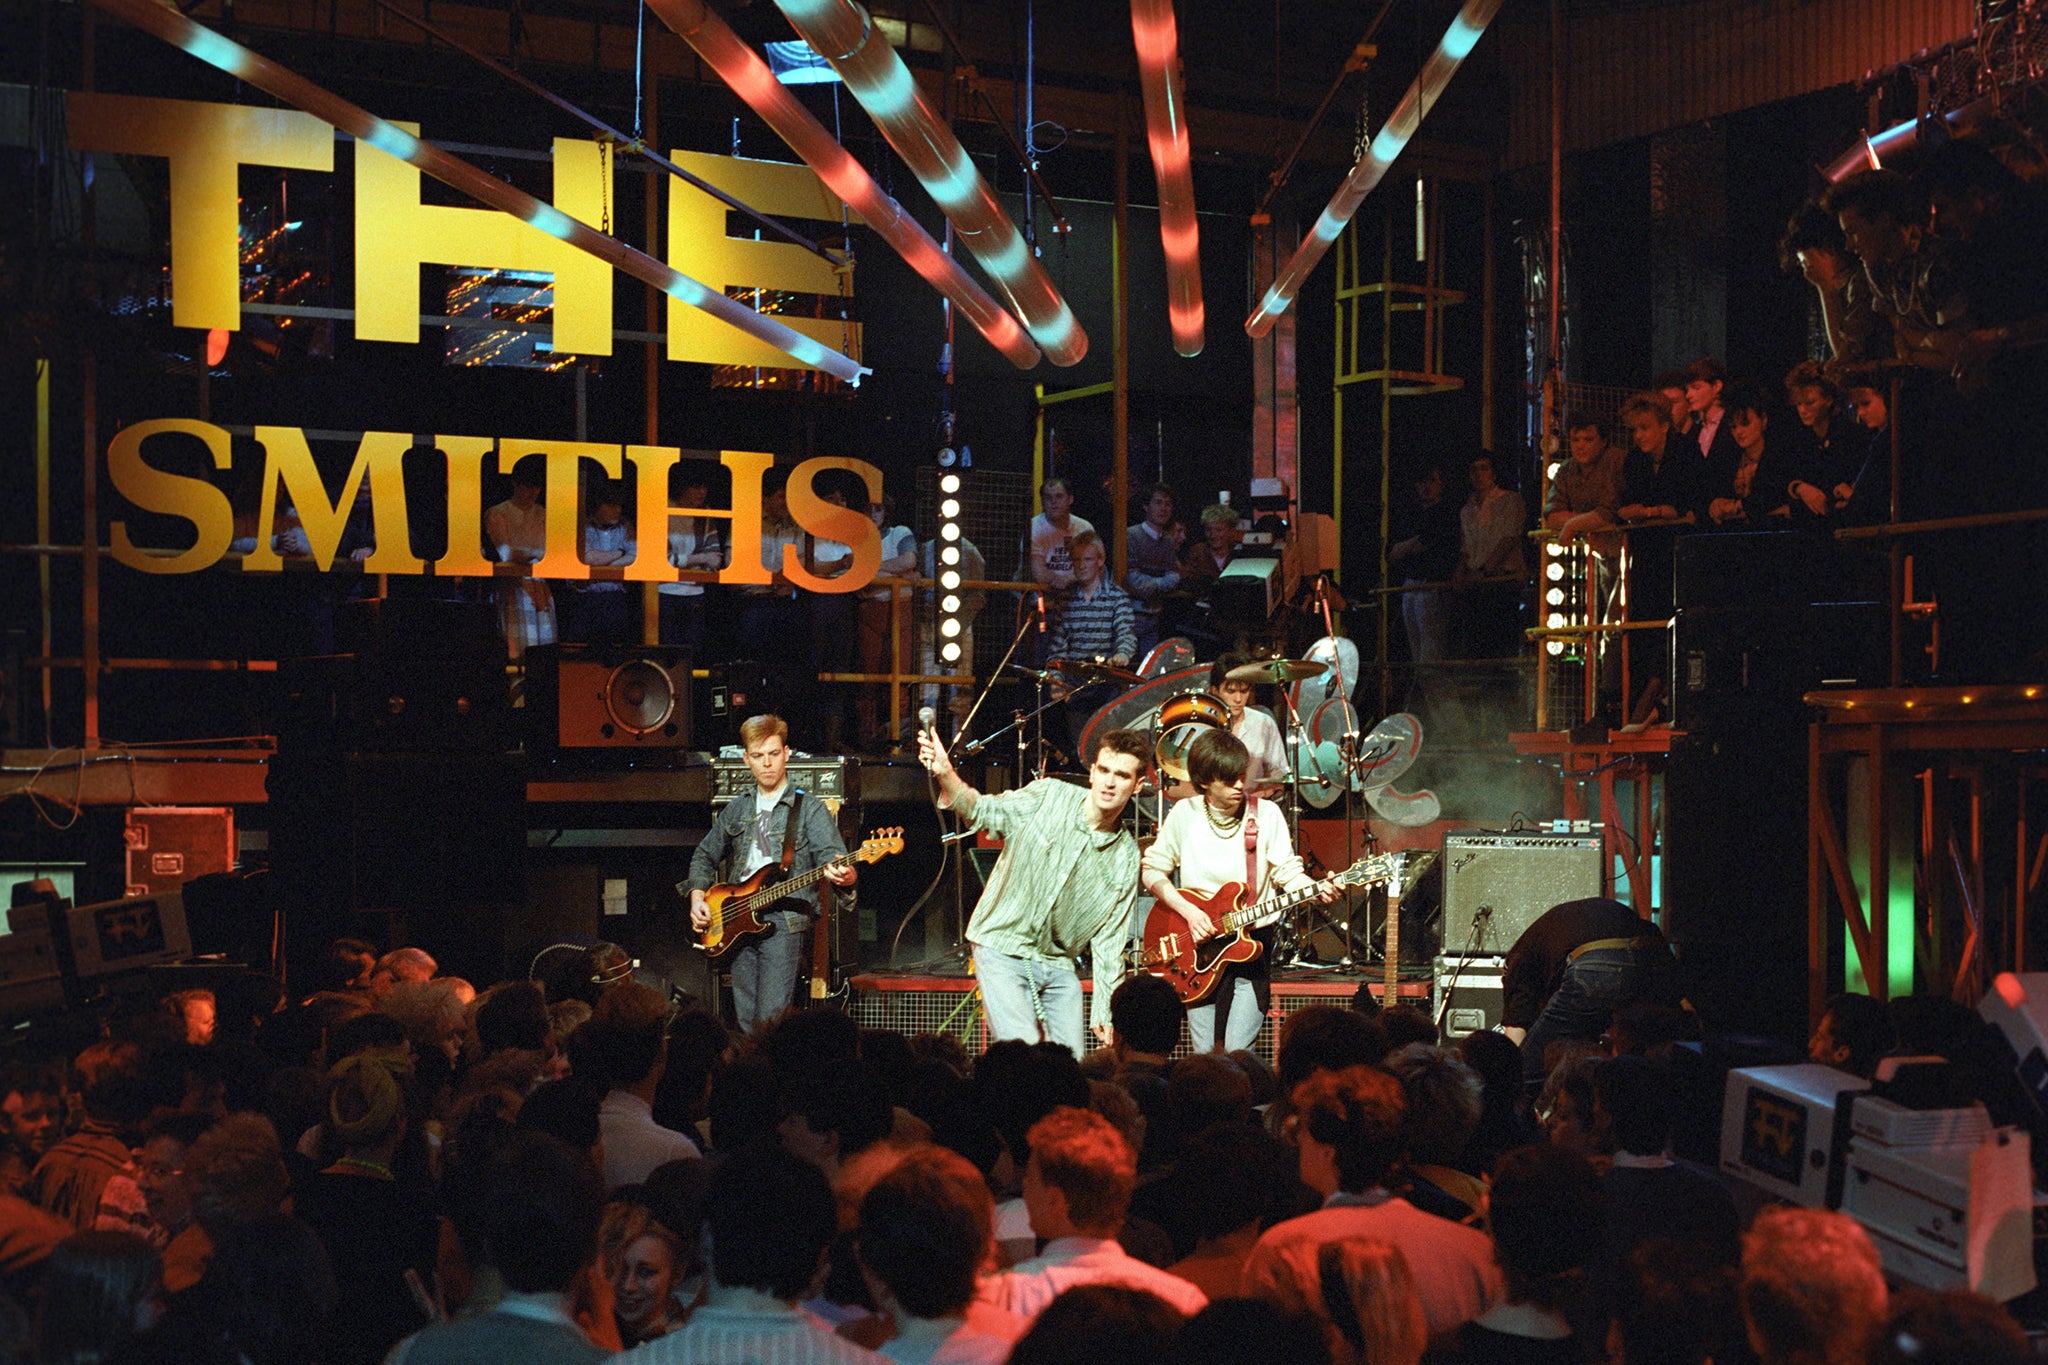 The Smiths perform on ‘The Tube’